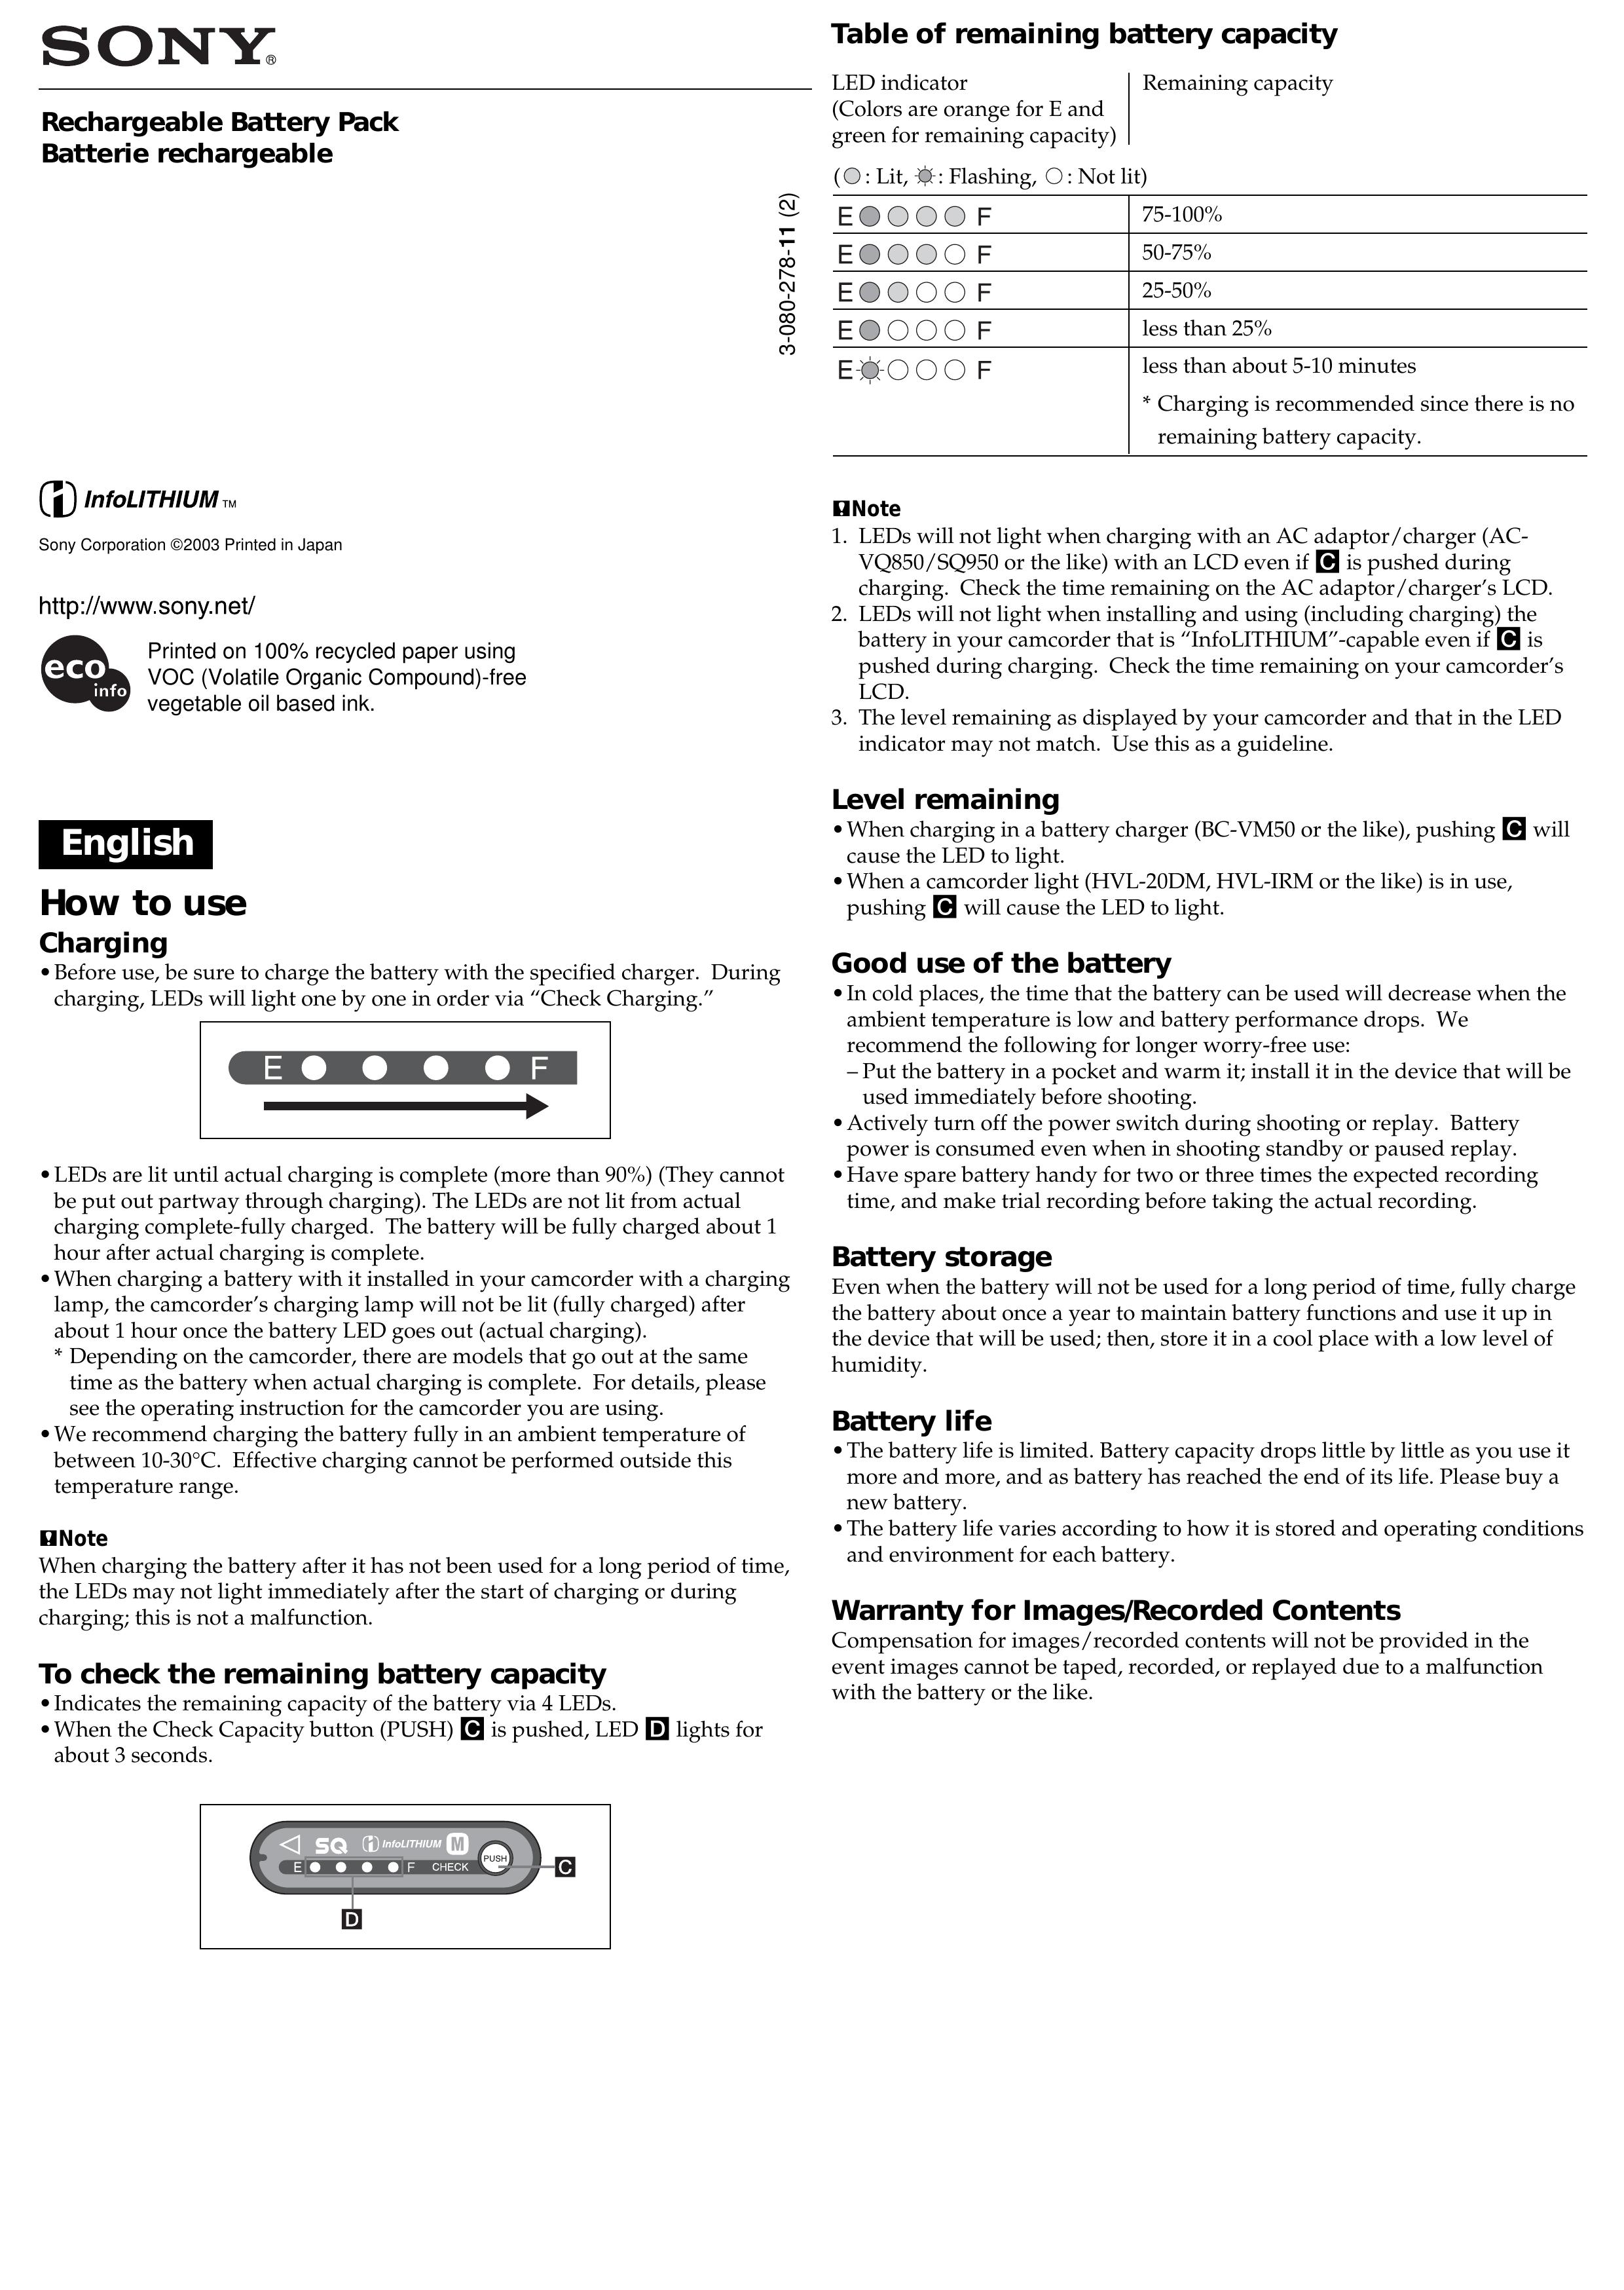 Sony NP QM91 Camcorder Accessories User Manual